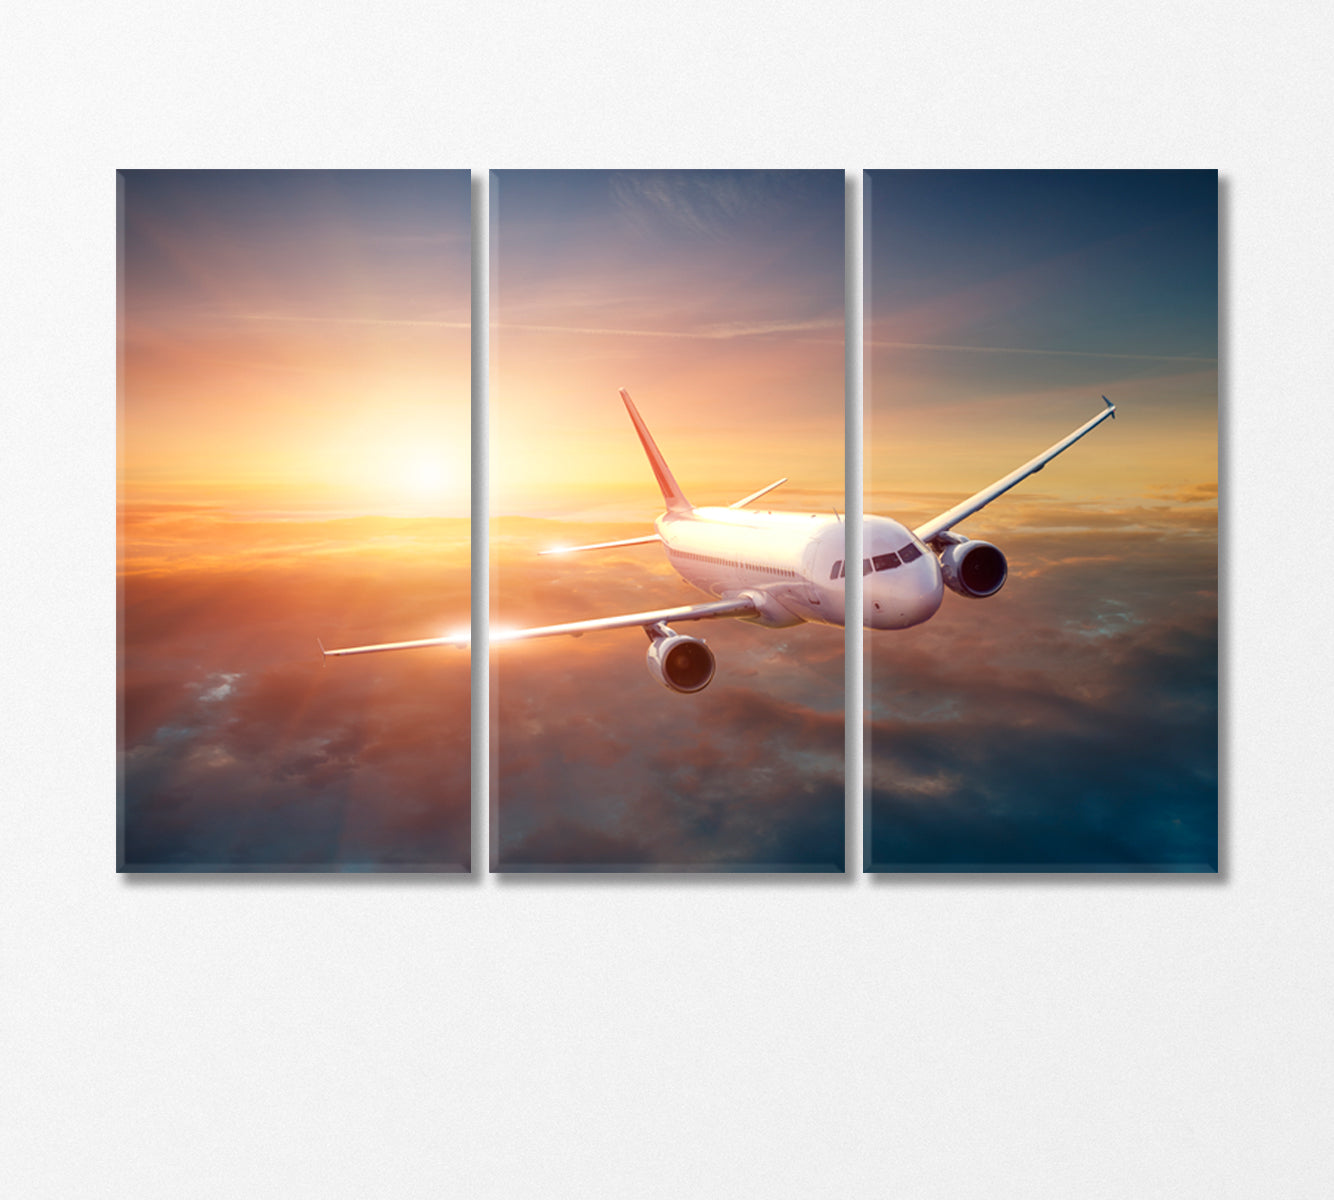 Airplane in Sky at Sunset Canvas Print-Canvas Print-CetArt-3 Panels-36x24 inches-CetArt